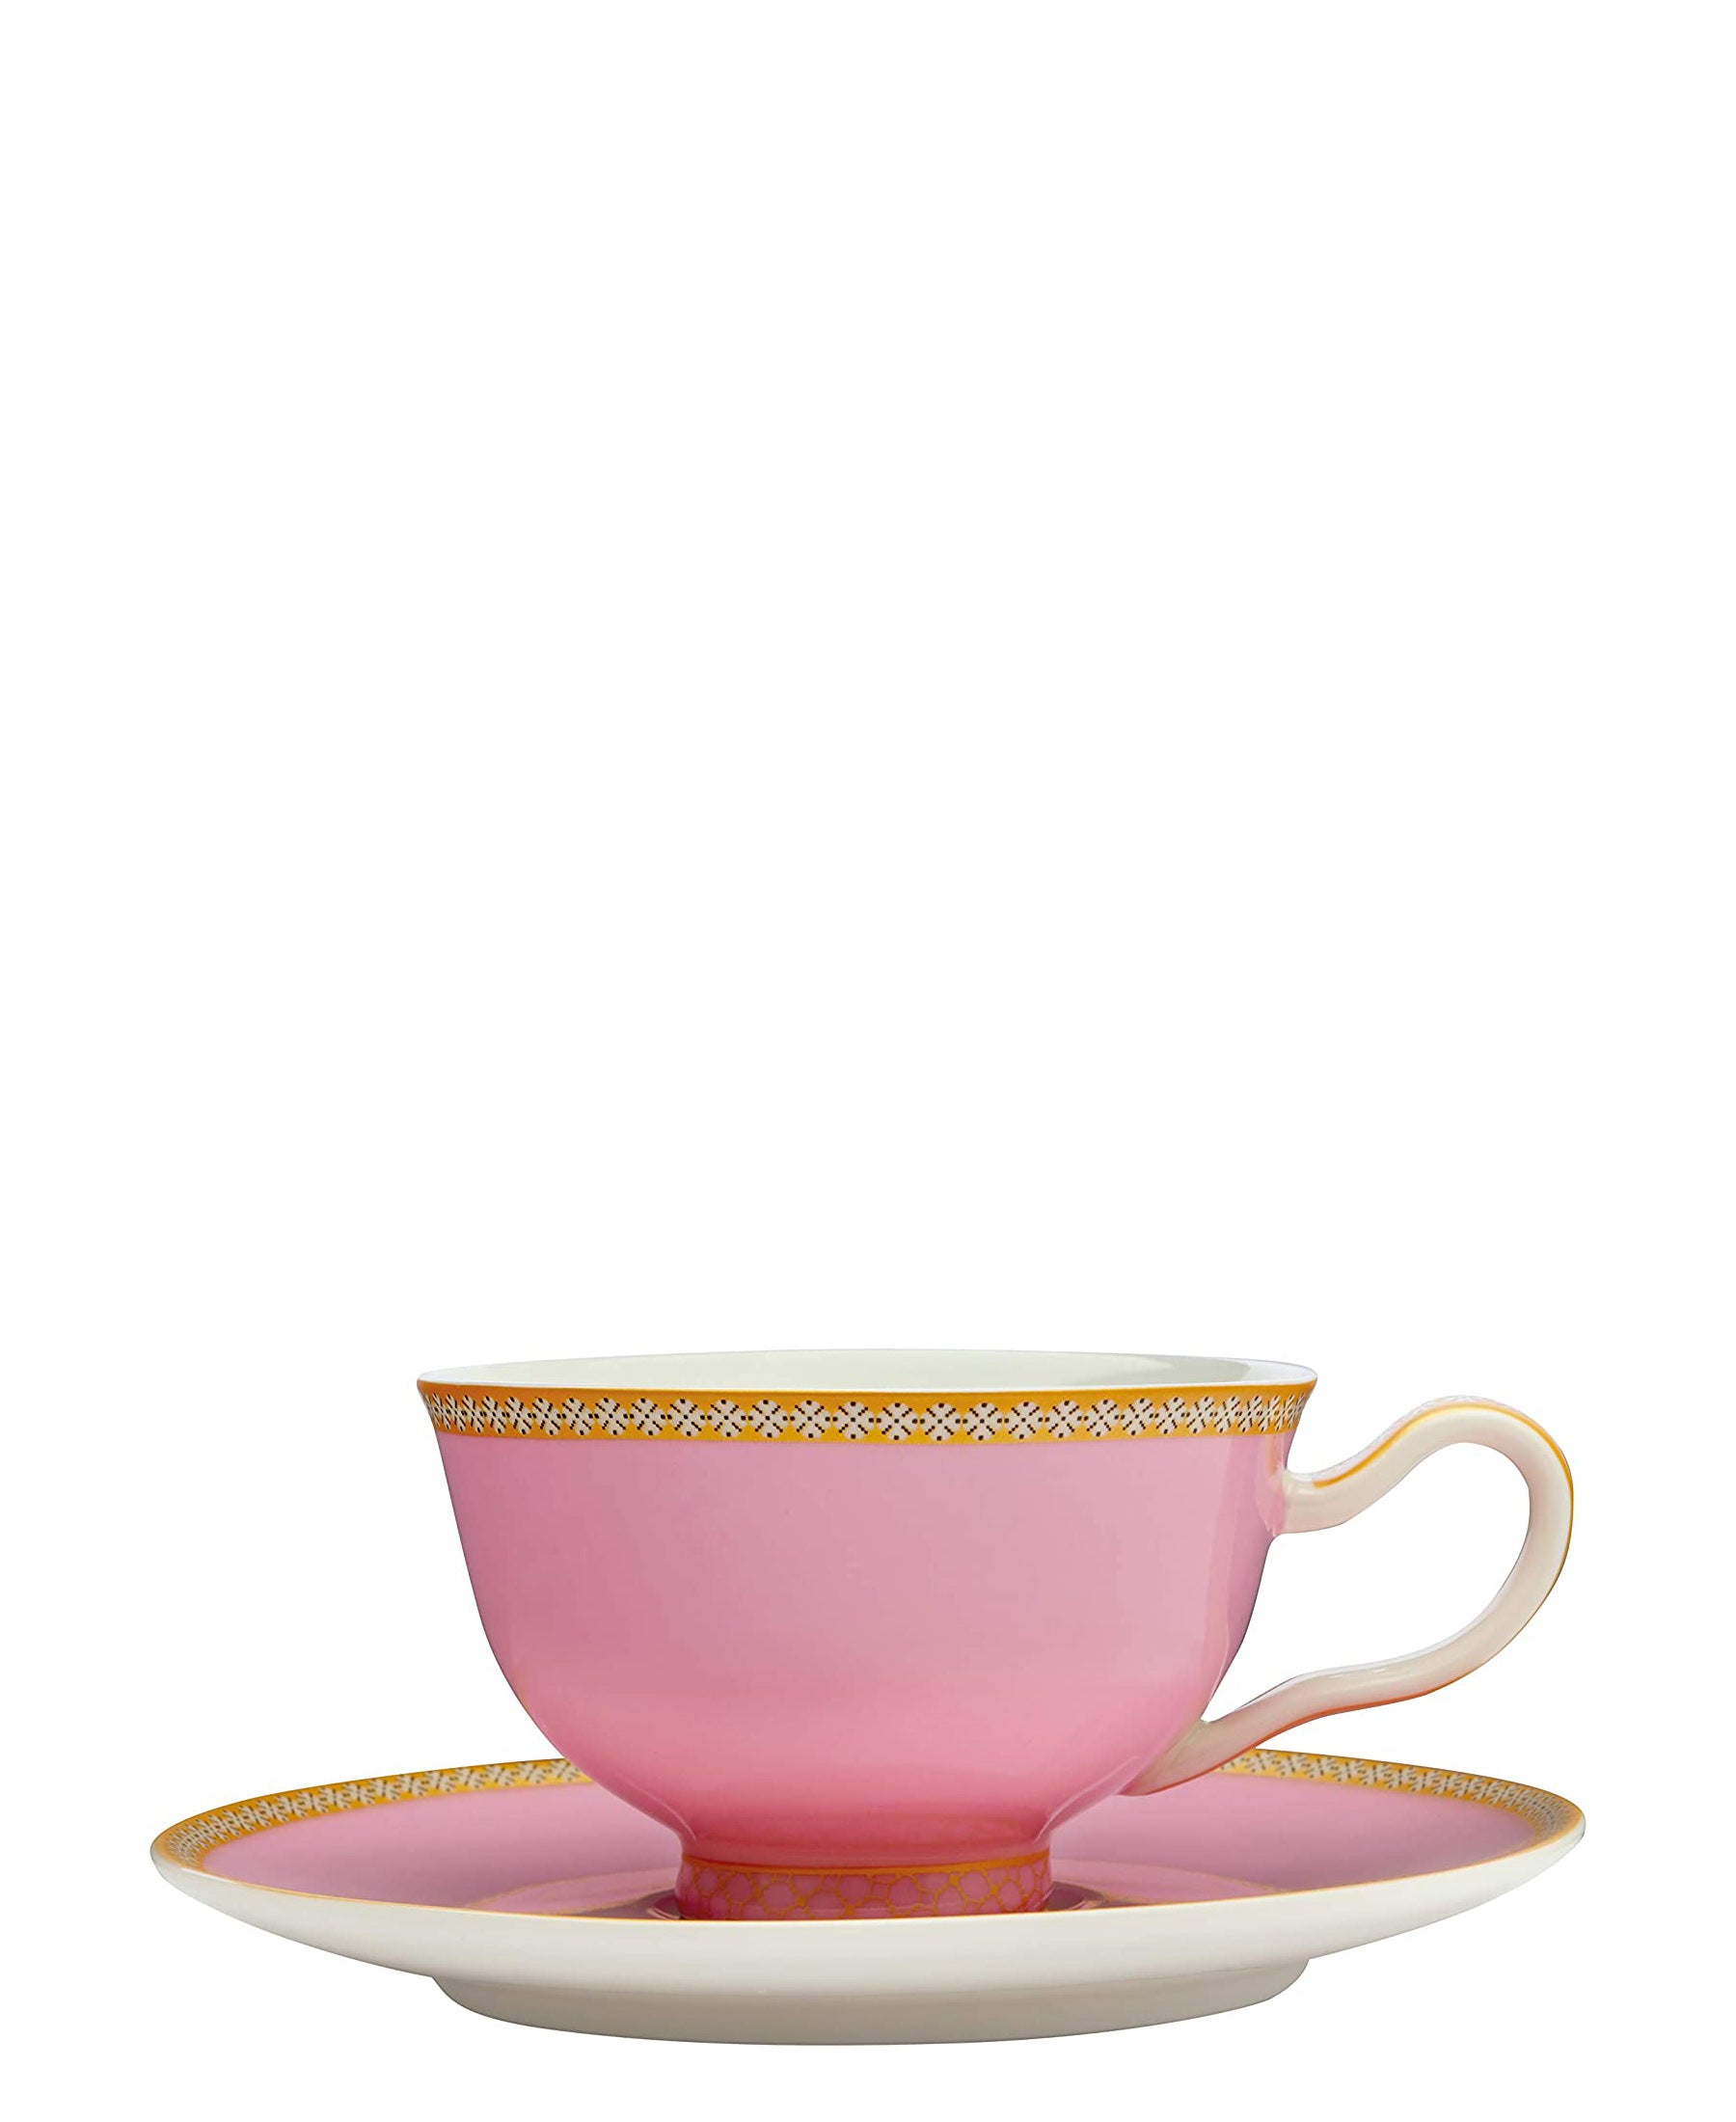 Maxwell & Williams Kasbah Footed Cup & Saucer - Pink